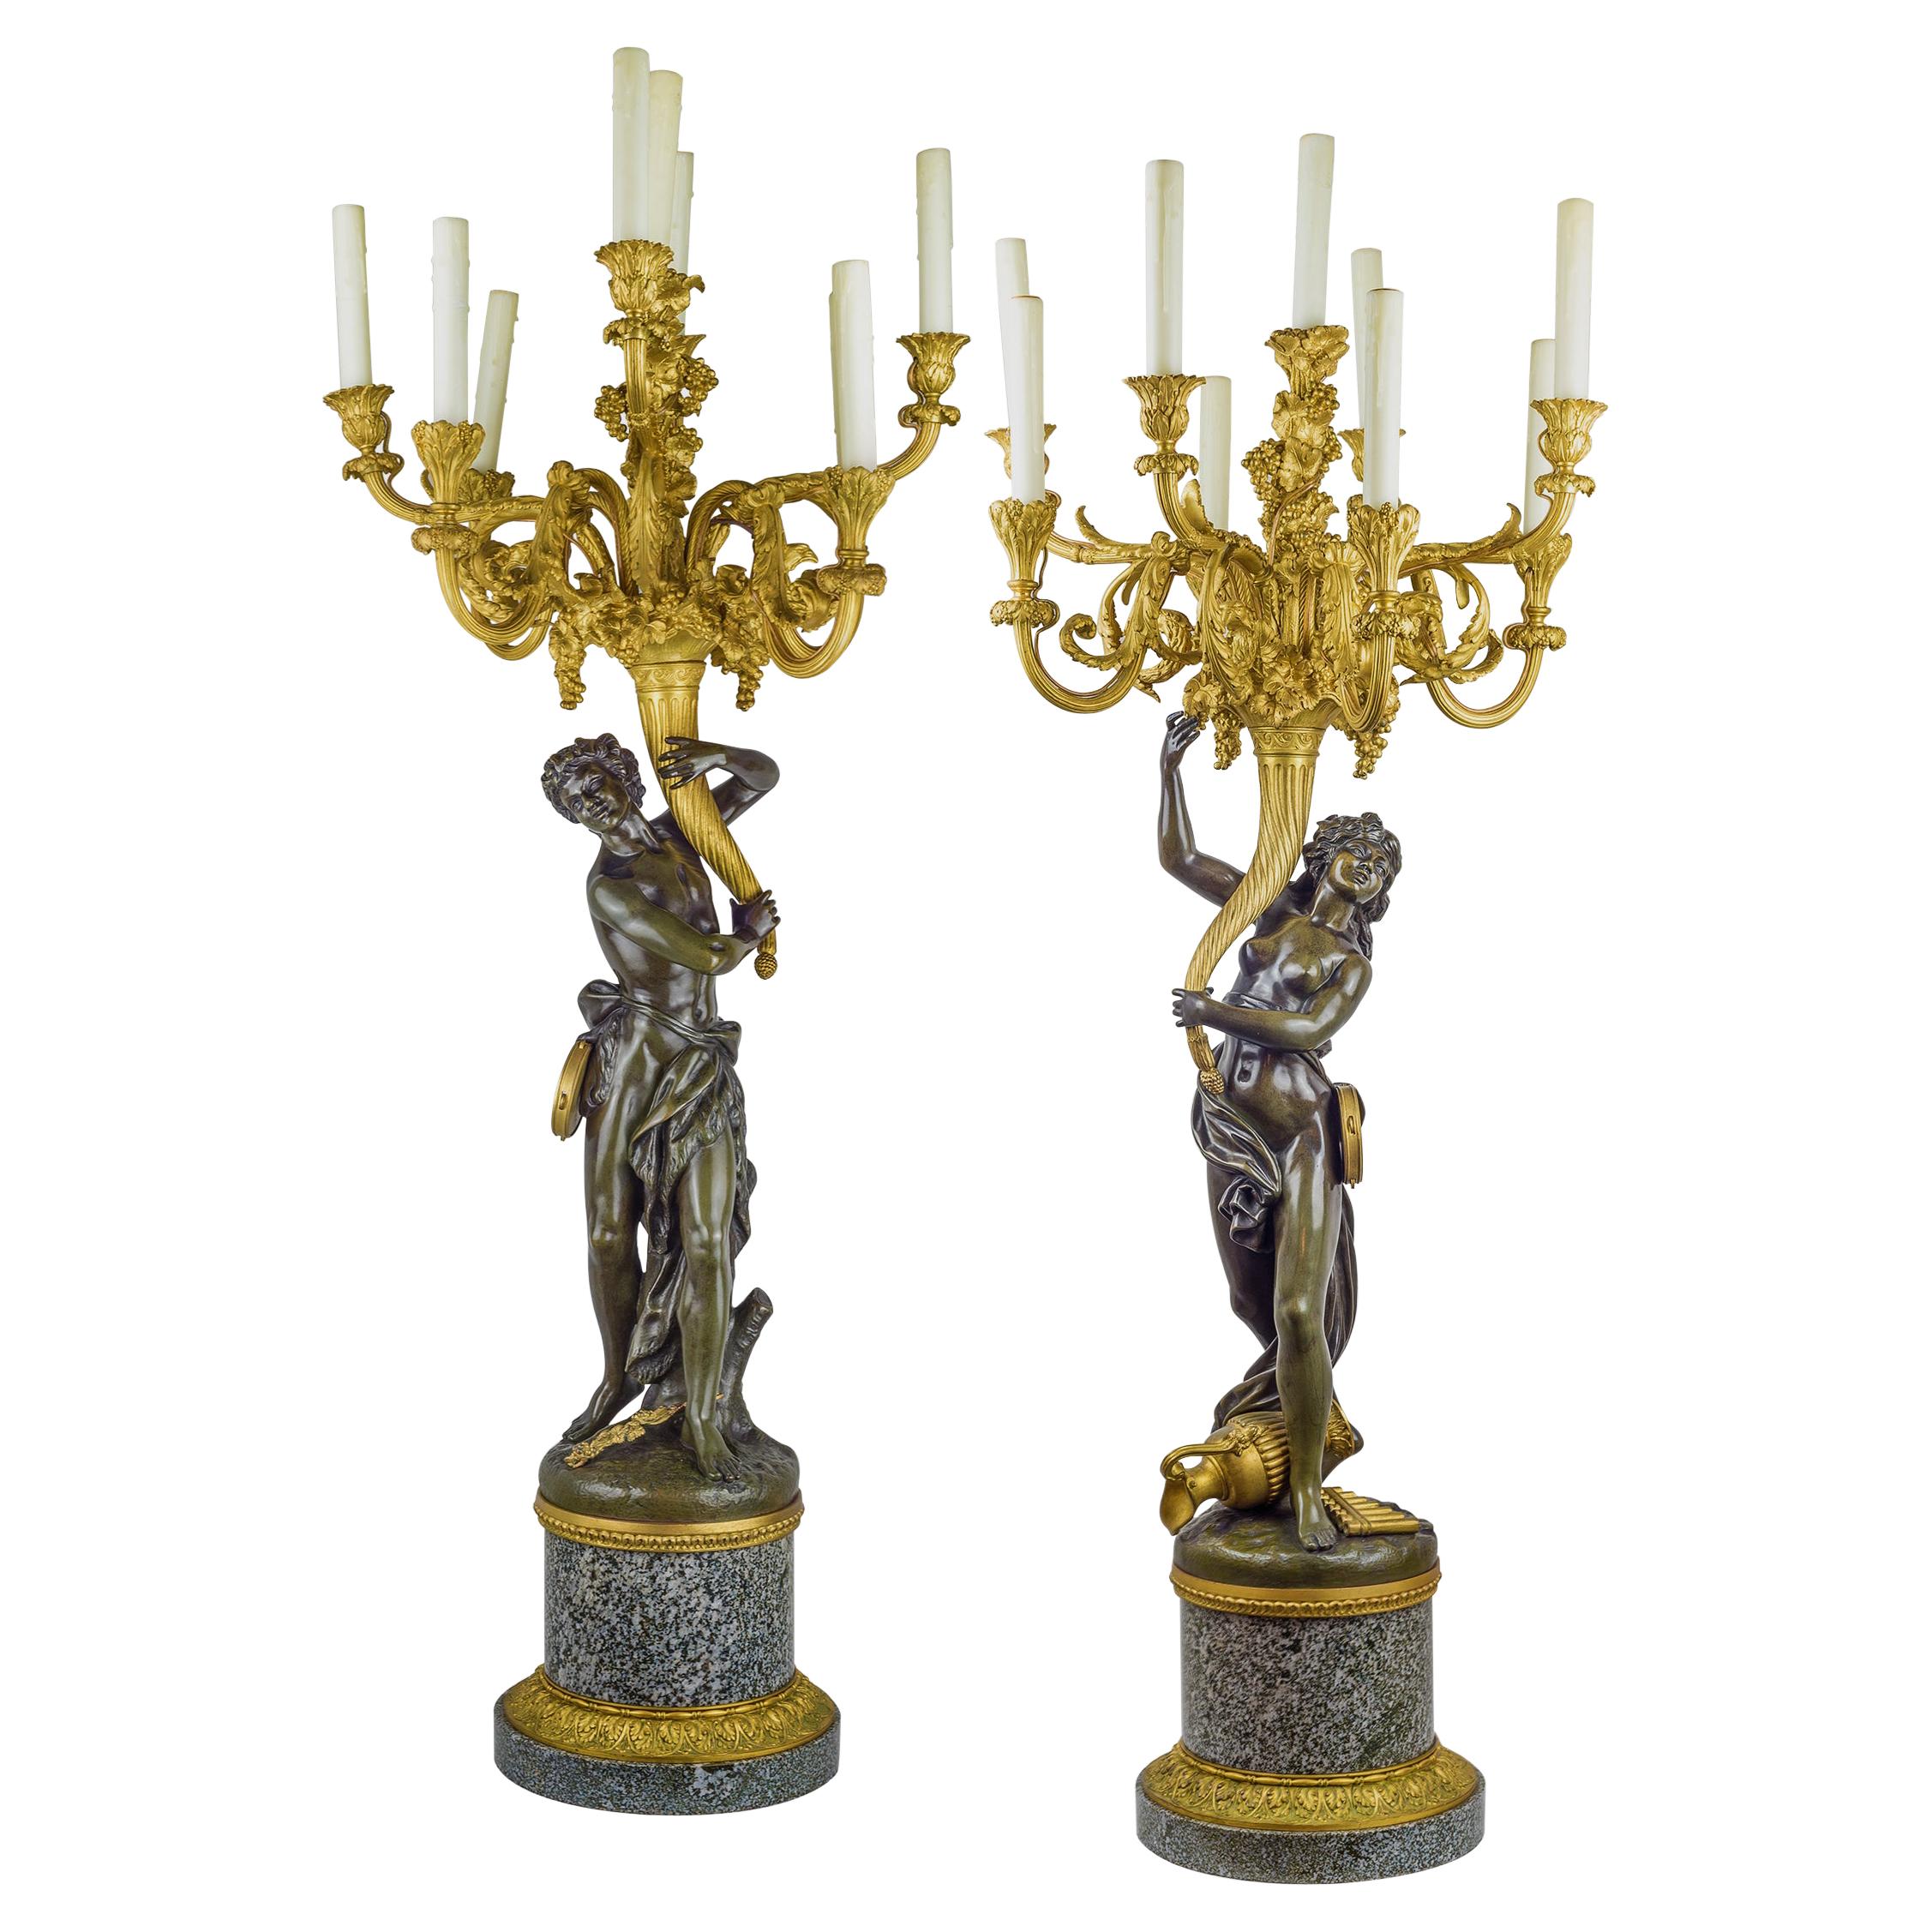  Important Pair of Monumental Ormolu and Patinated Bronze Nine-Light Candelabra